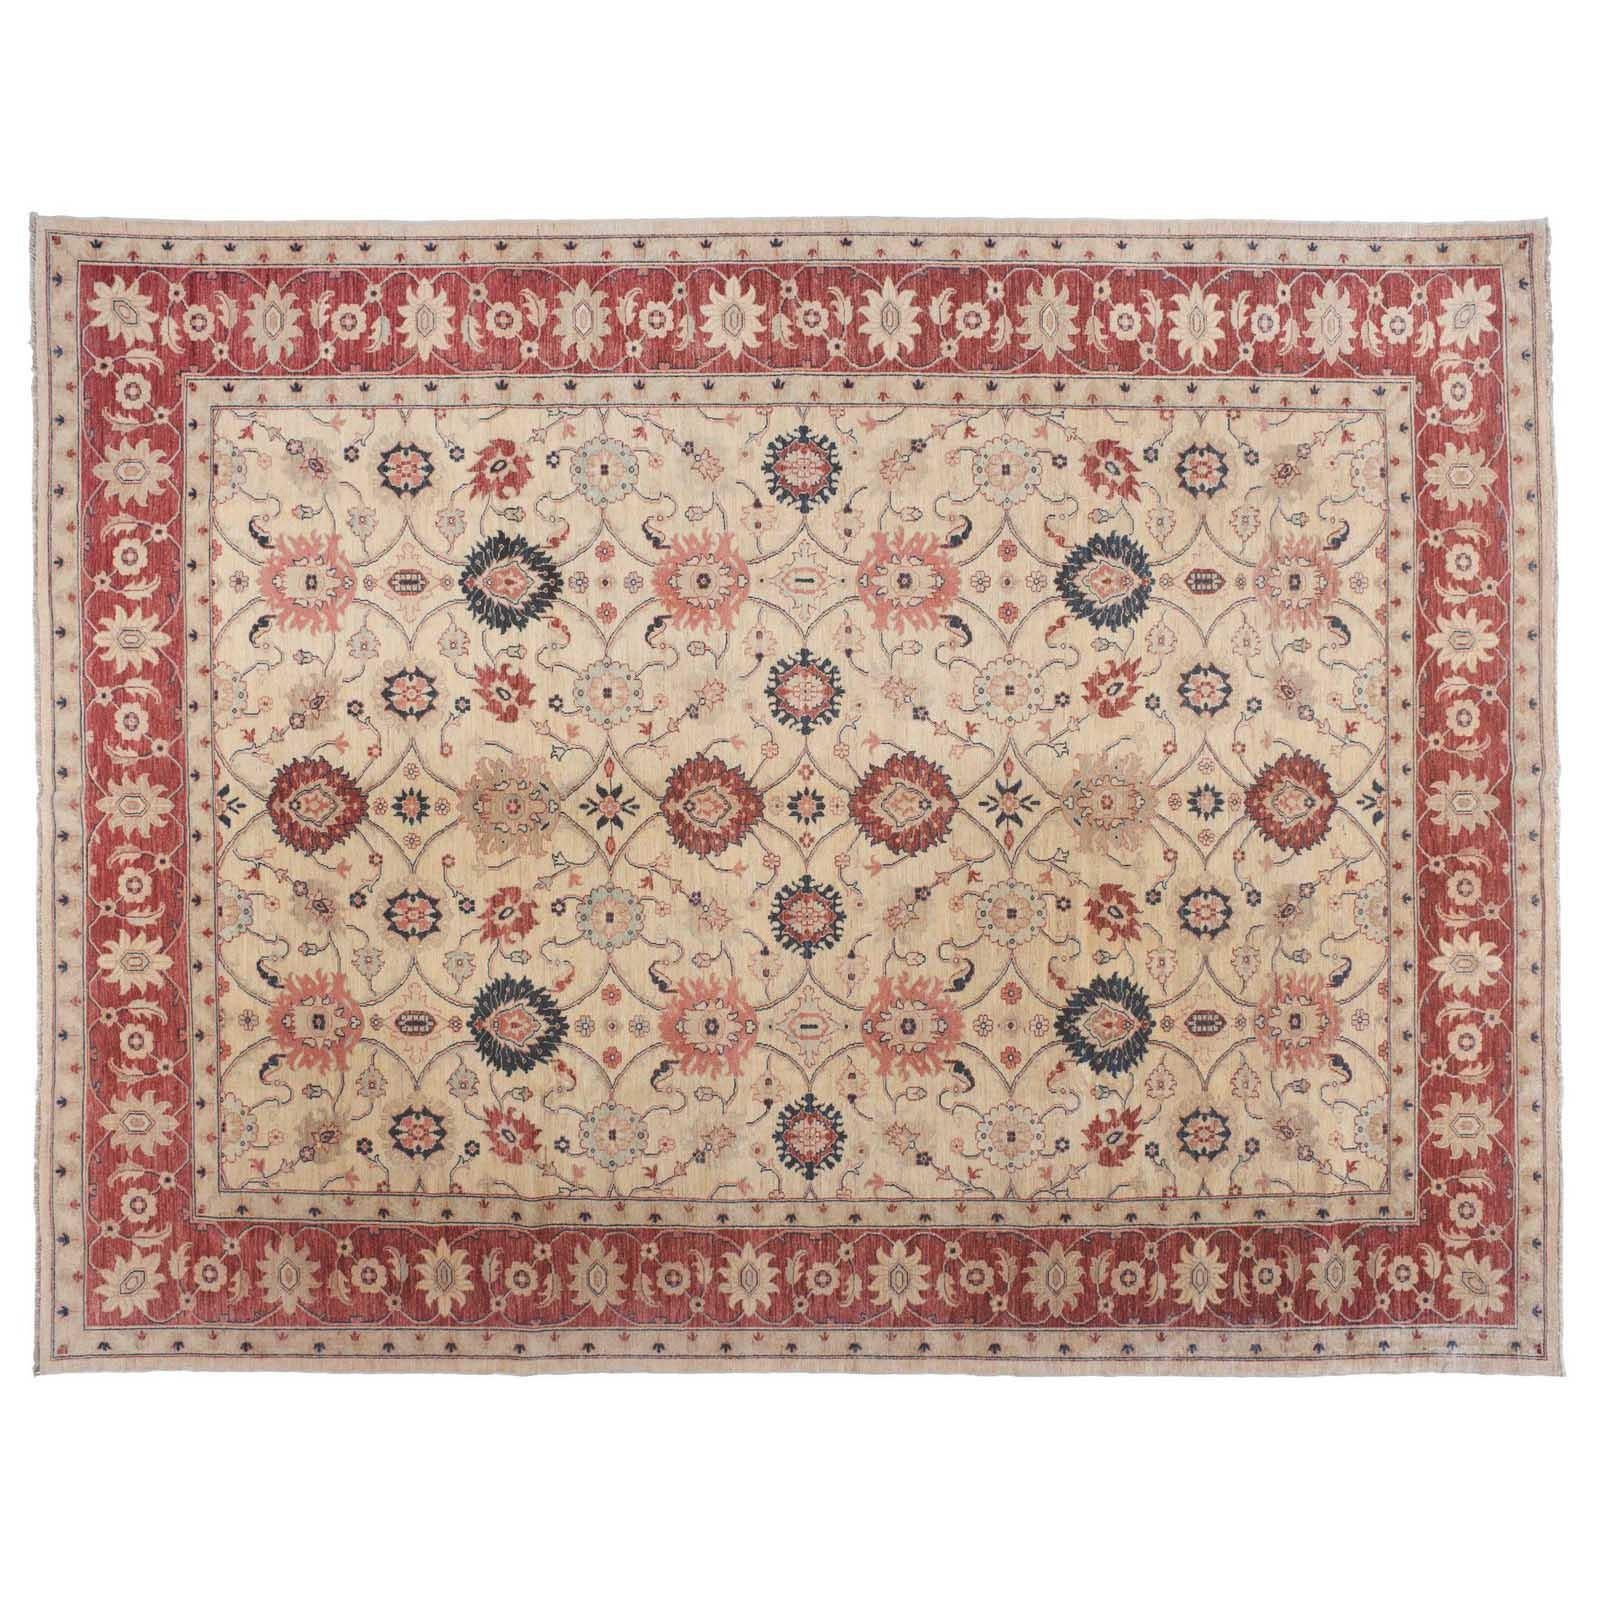 Traditional Pakistani Beige Floral Rug with Red and Teal